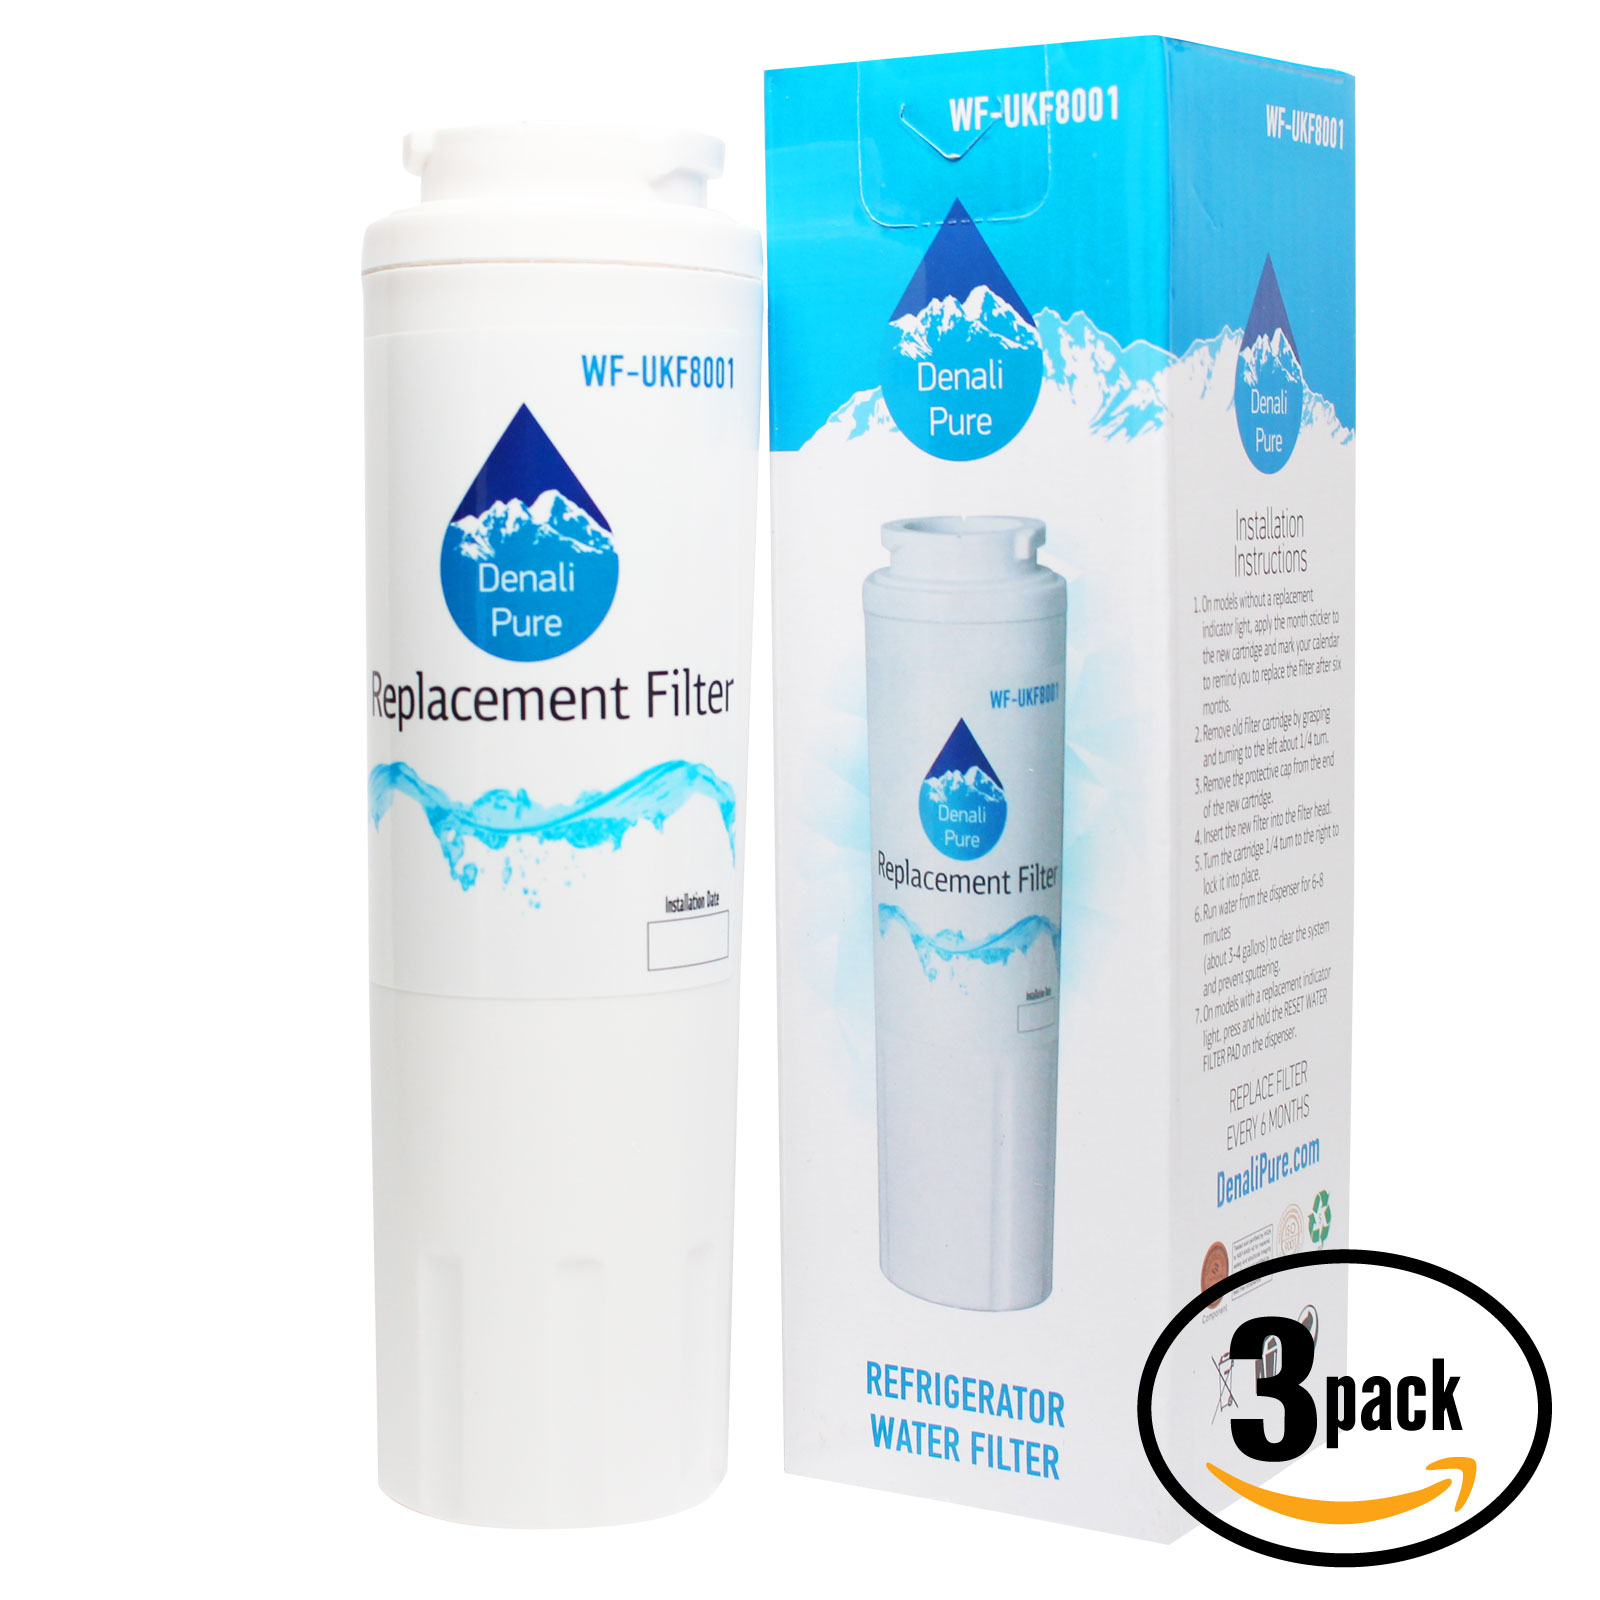 3-Pack Replacement for KitchenAid KFIS25XVMS8 Refrigerator Water Filter - Compatible with KitchenAid 4396395 Fridge Water Filter Cartridge - image 1 of 4